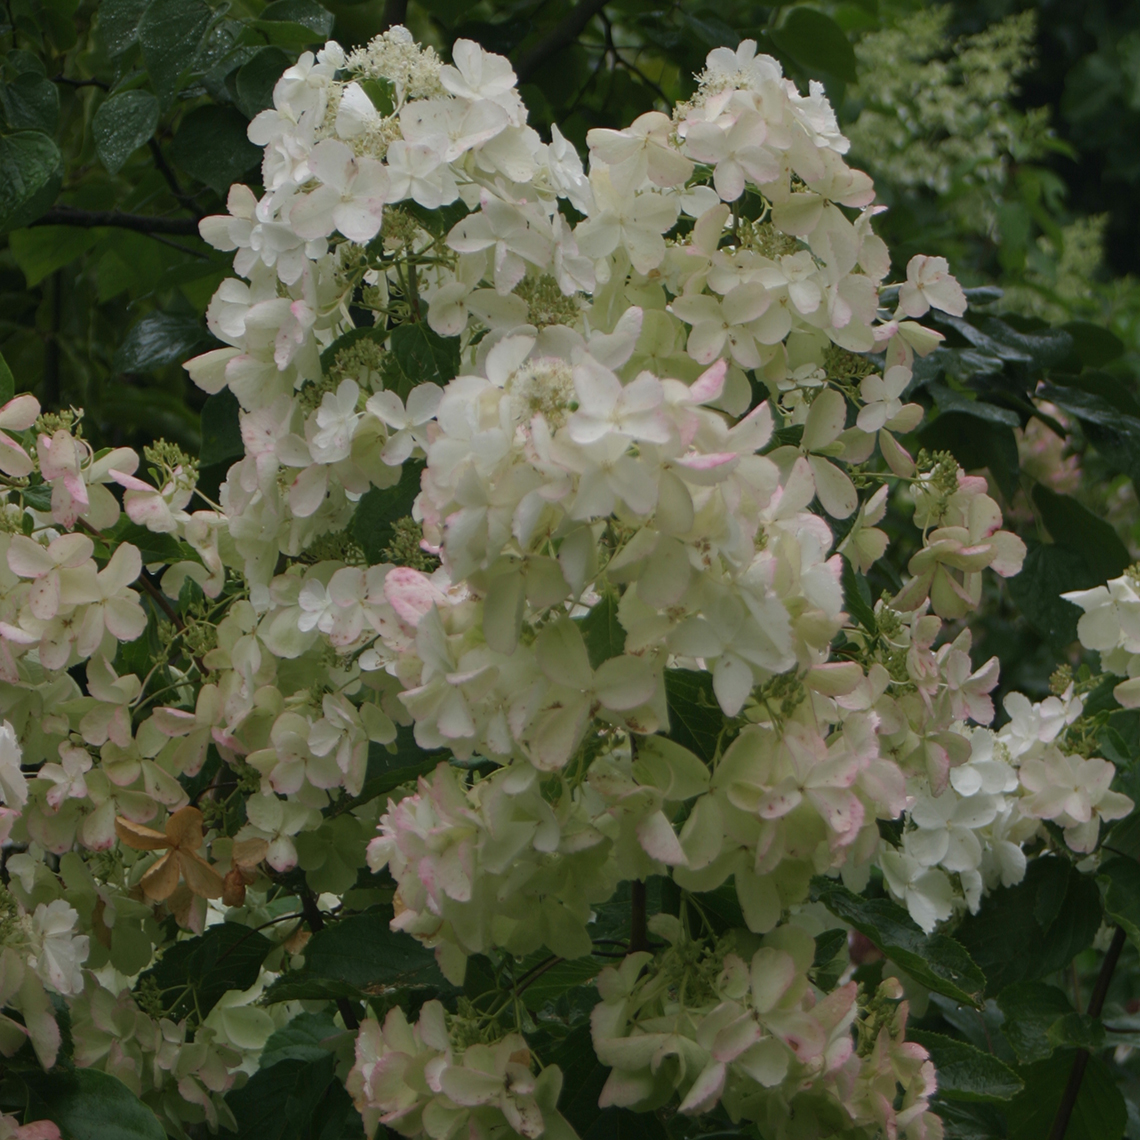 The large lacy white flowers of Polar Ball panicle hydrangea